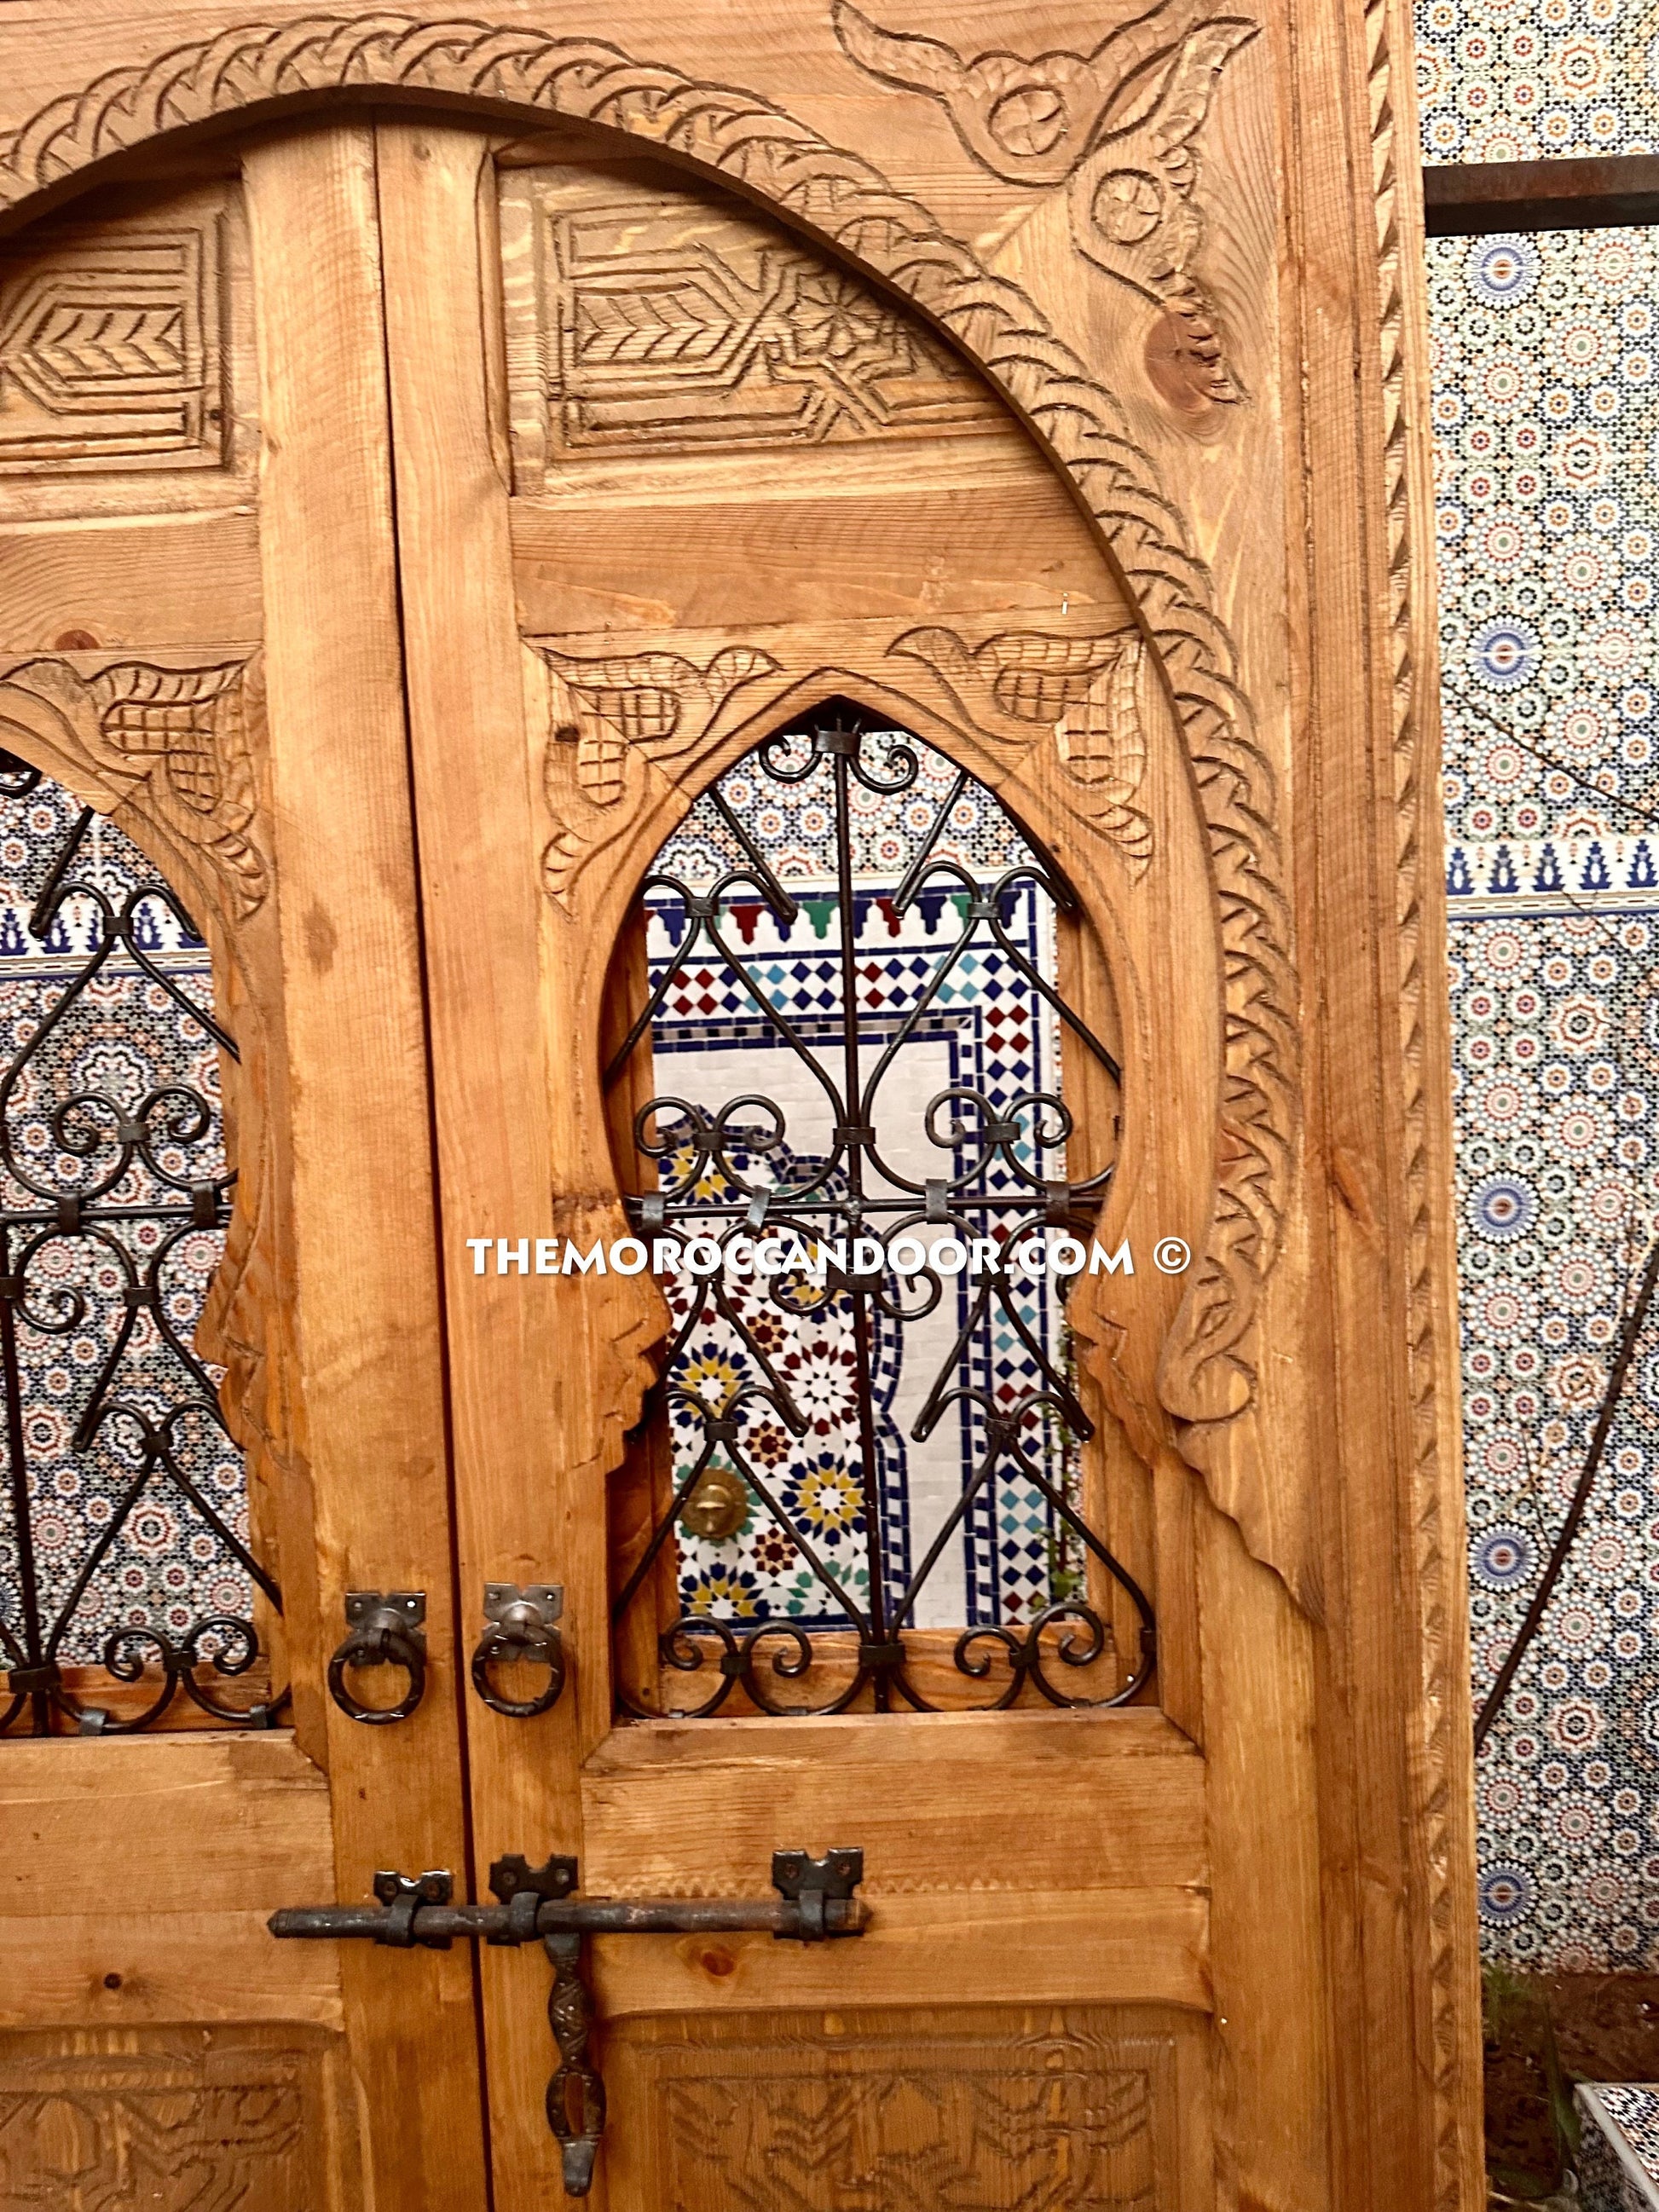 Exquisite Handcrafted Wood Door with Elegant Wrought Iron Windows - Hand-Carved Wood with Wrought Iron Windows.